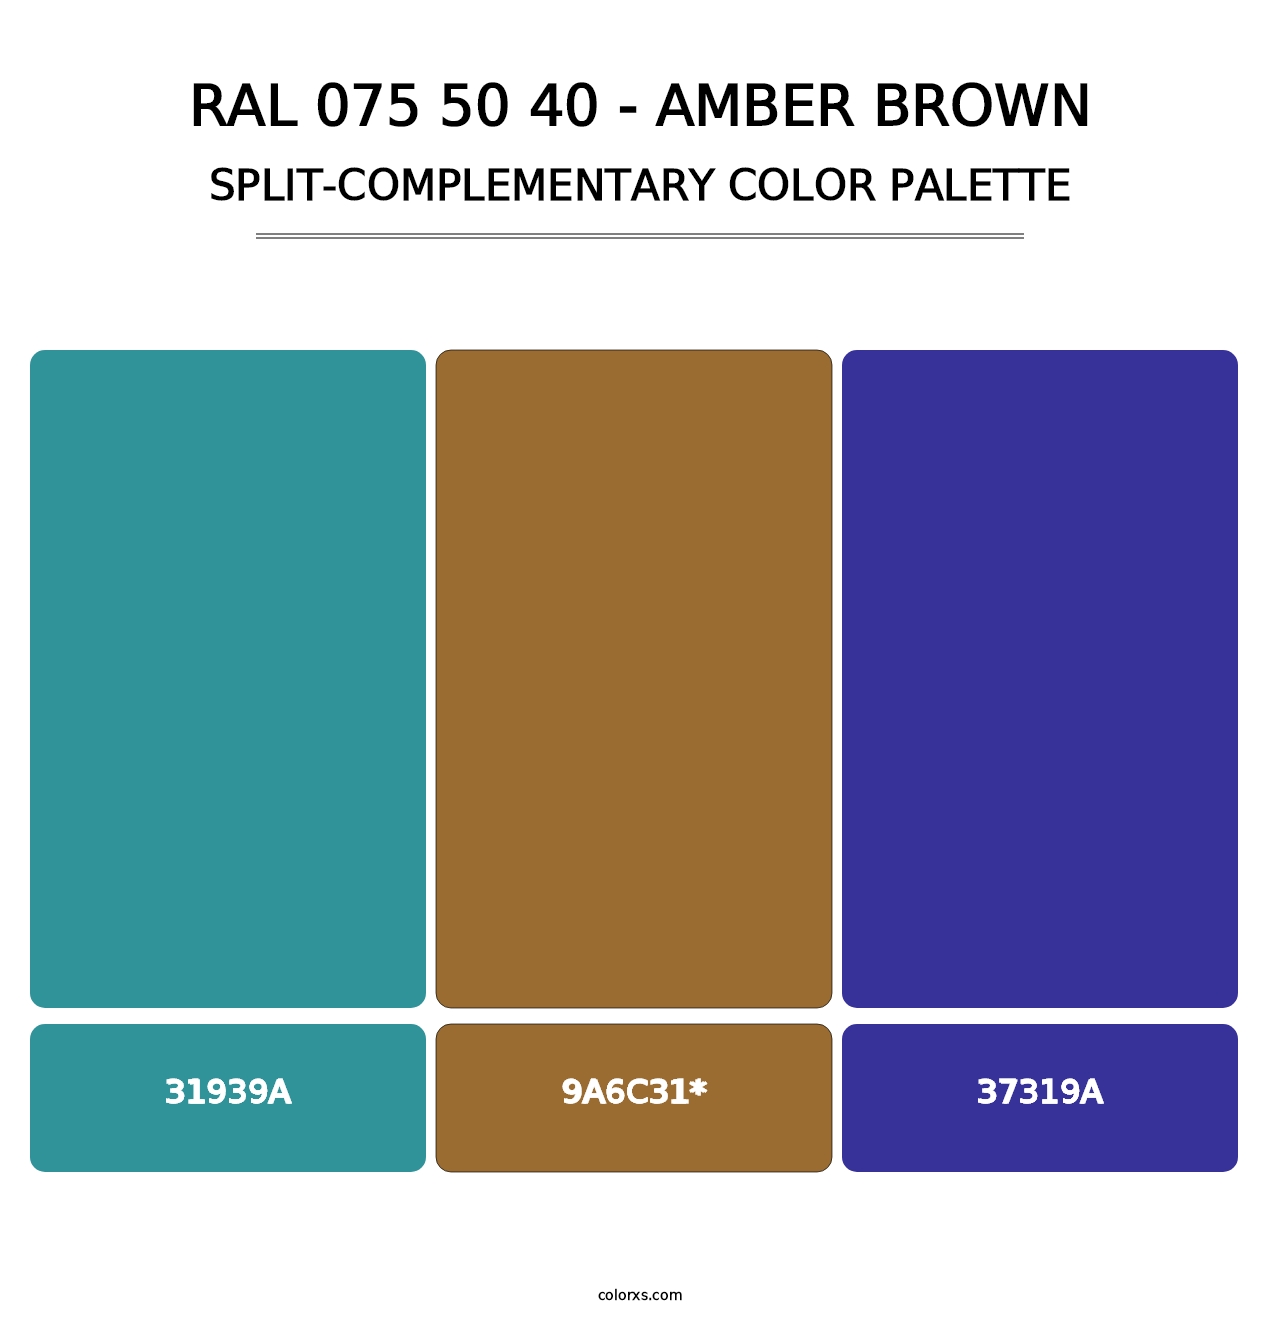 RAL 075 50 40 - Amber Brown - Split-Complementary Color Palette